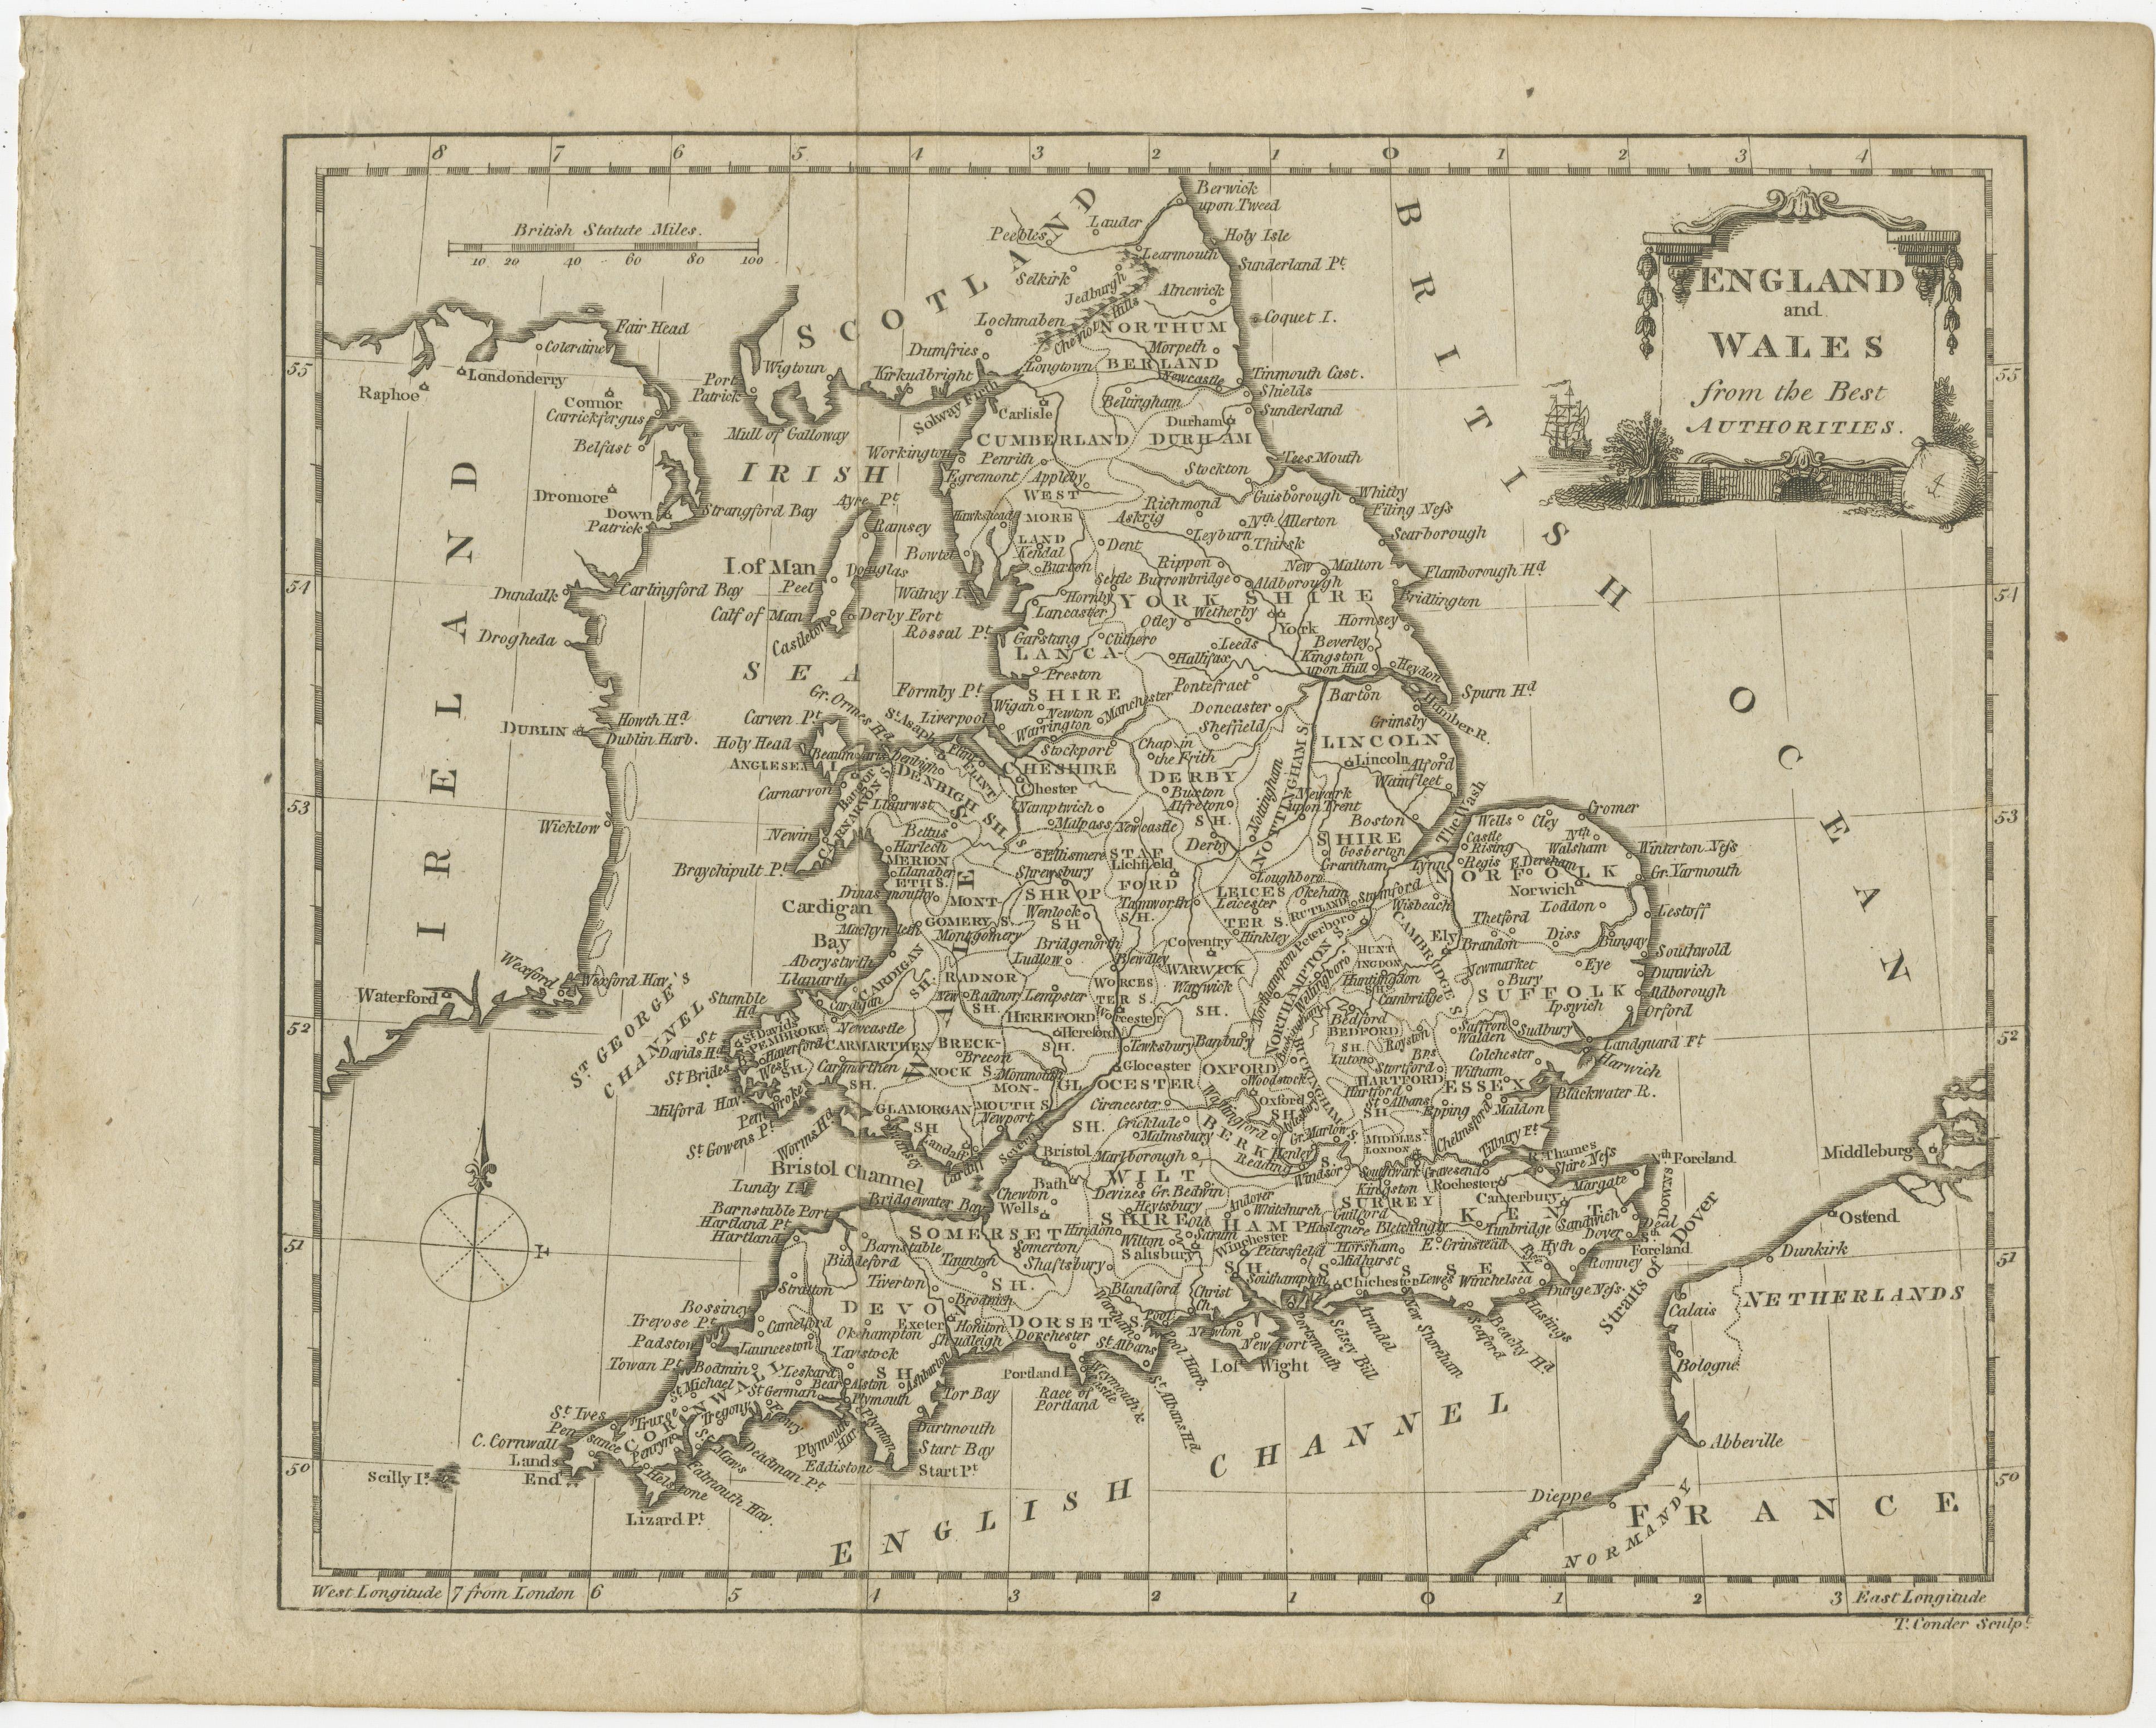 Antique map titled 'England and Wales from the best Authorities'. Original antique map of England and Wales, with decorative cartouche. Engraved by T. Conder. Published circa 1790.